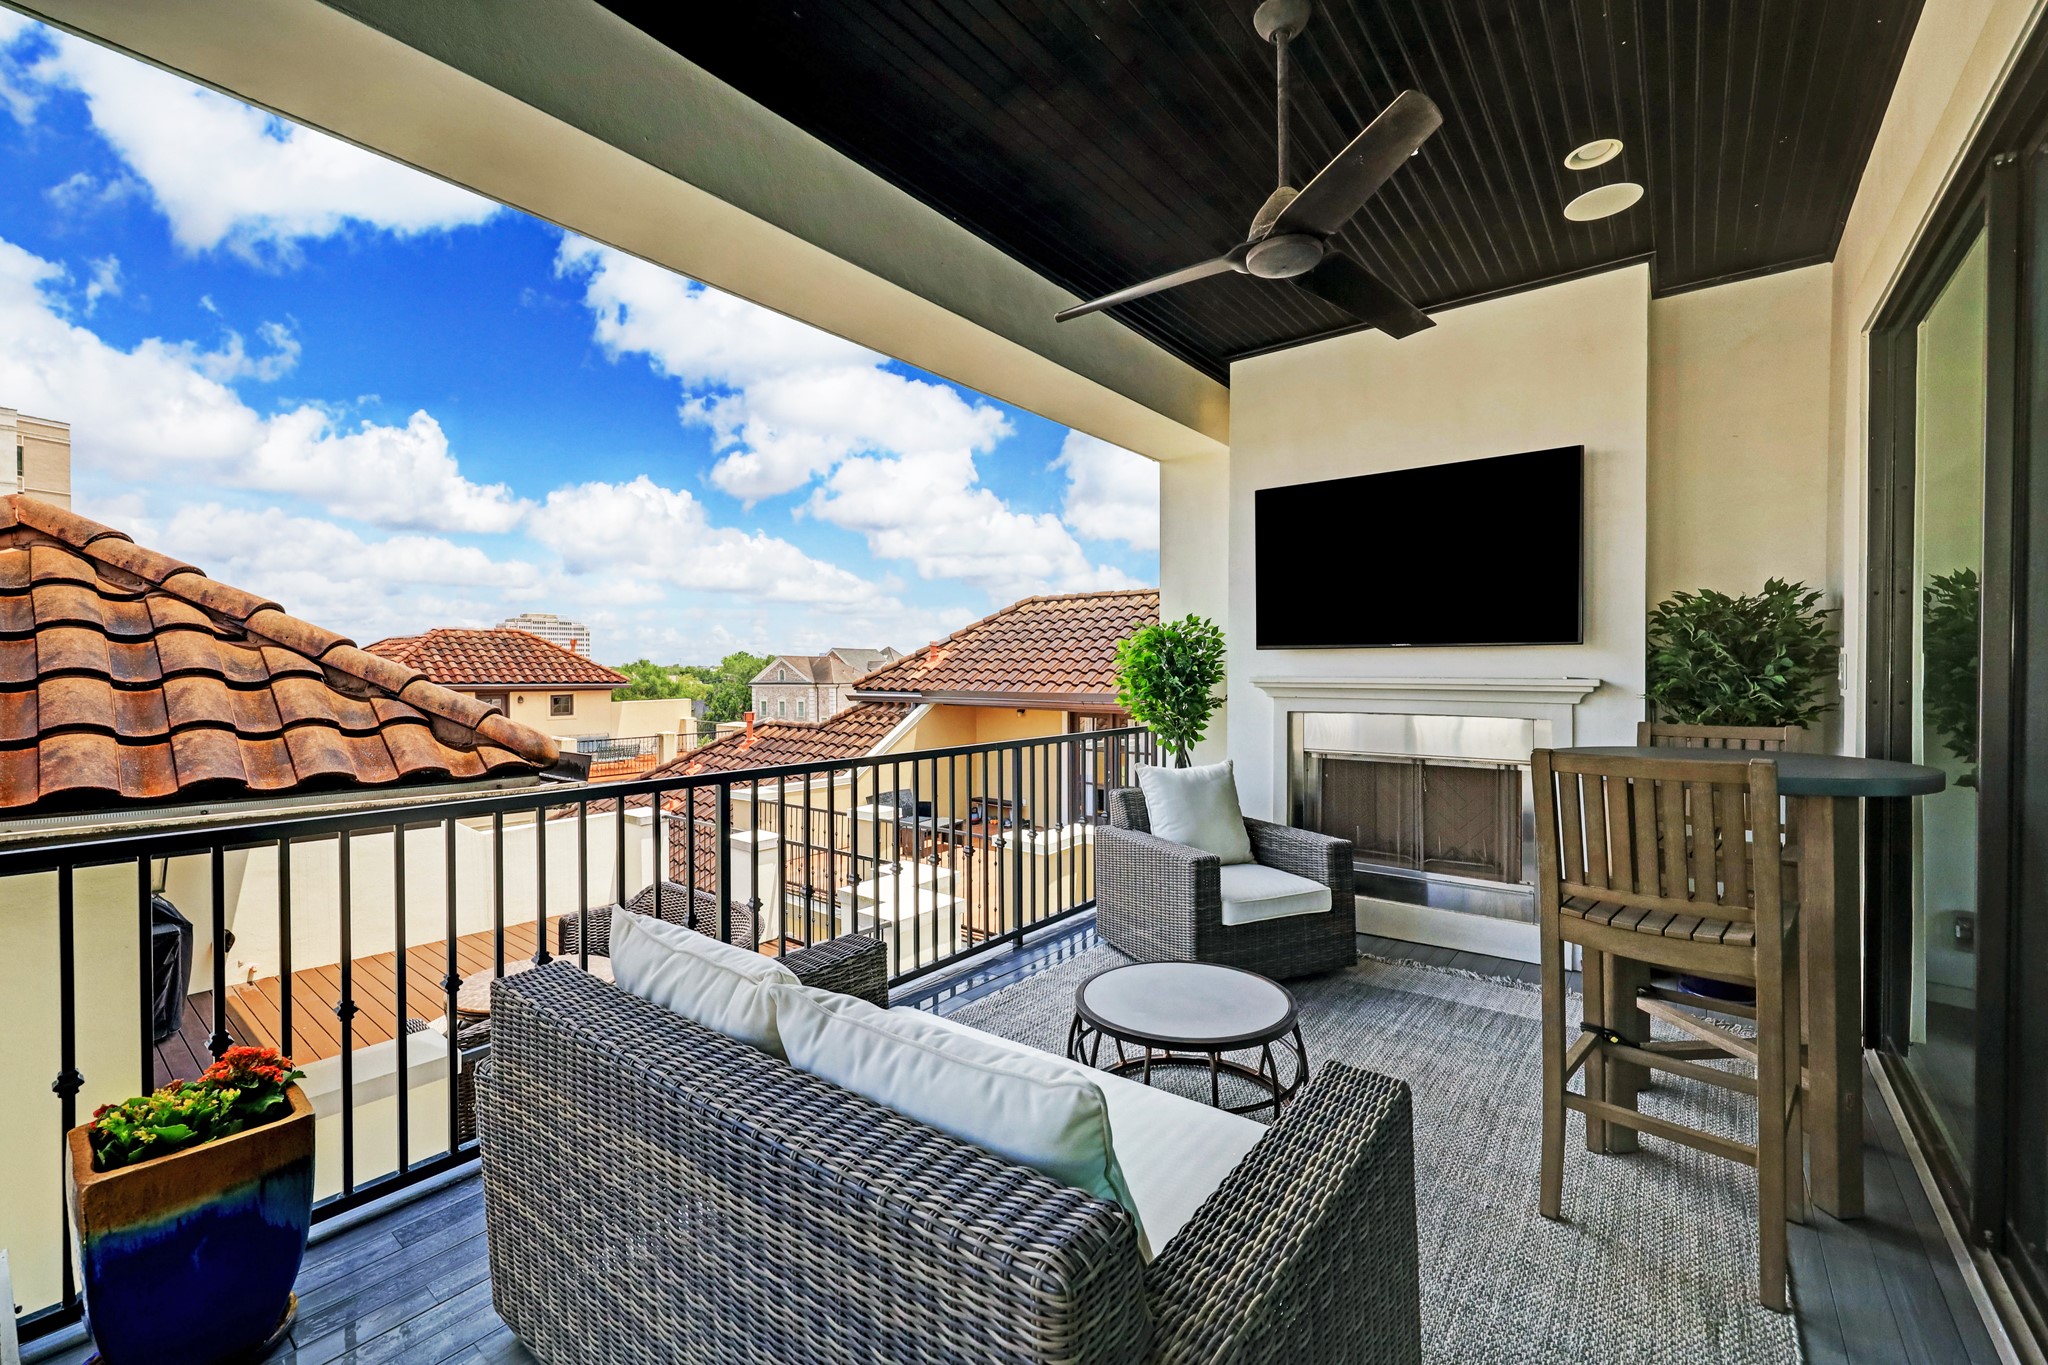 The outdoor patio features a fireplace, ceiling fan, and a built-in grill.